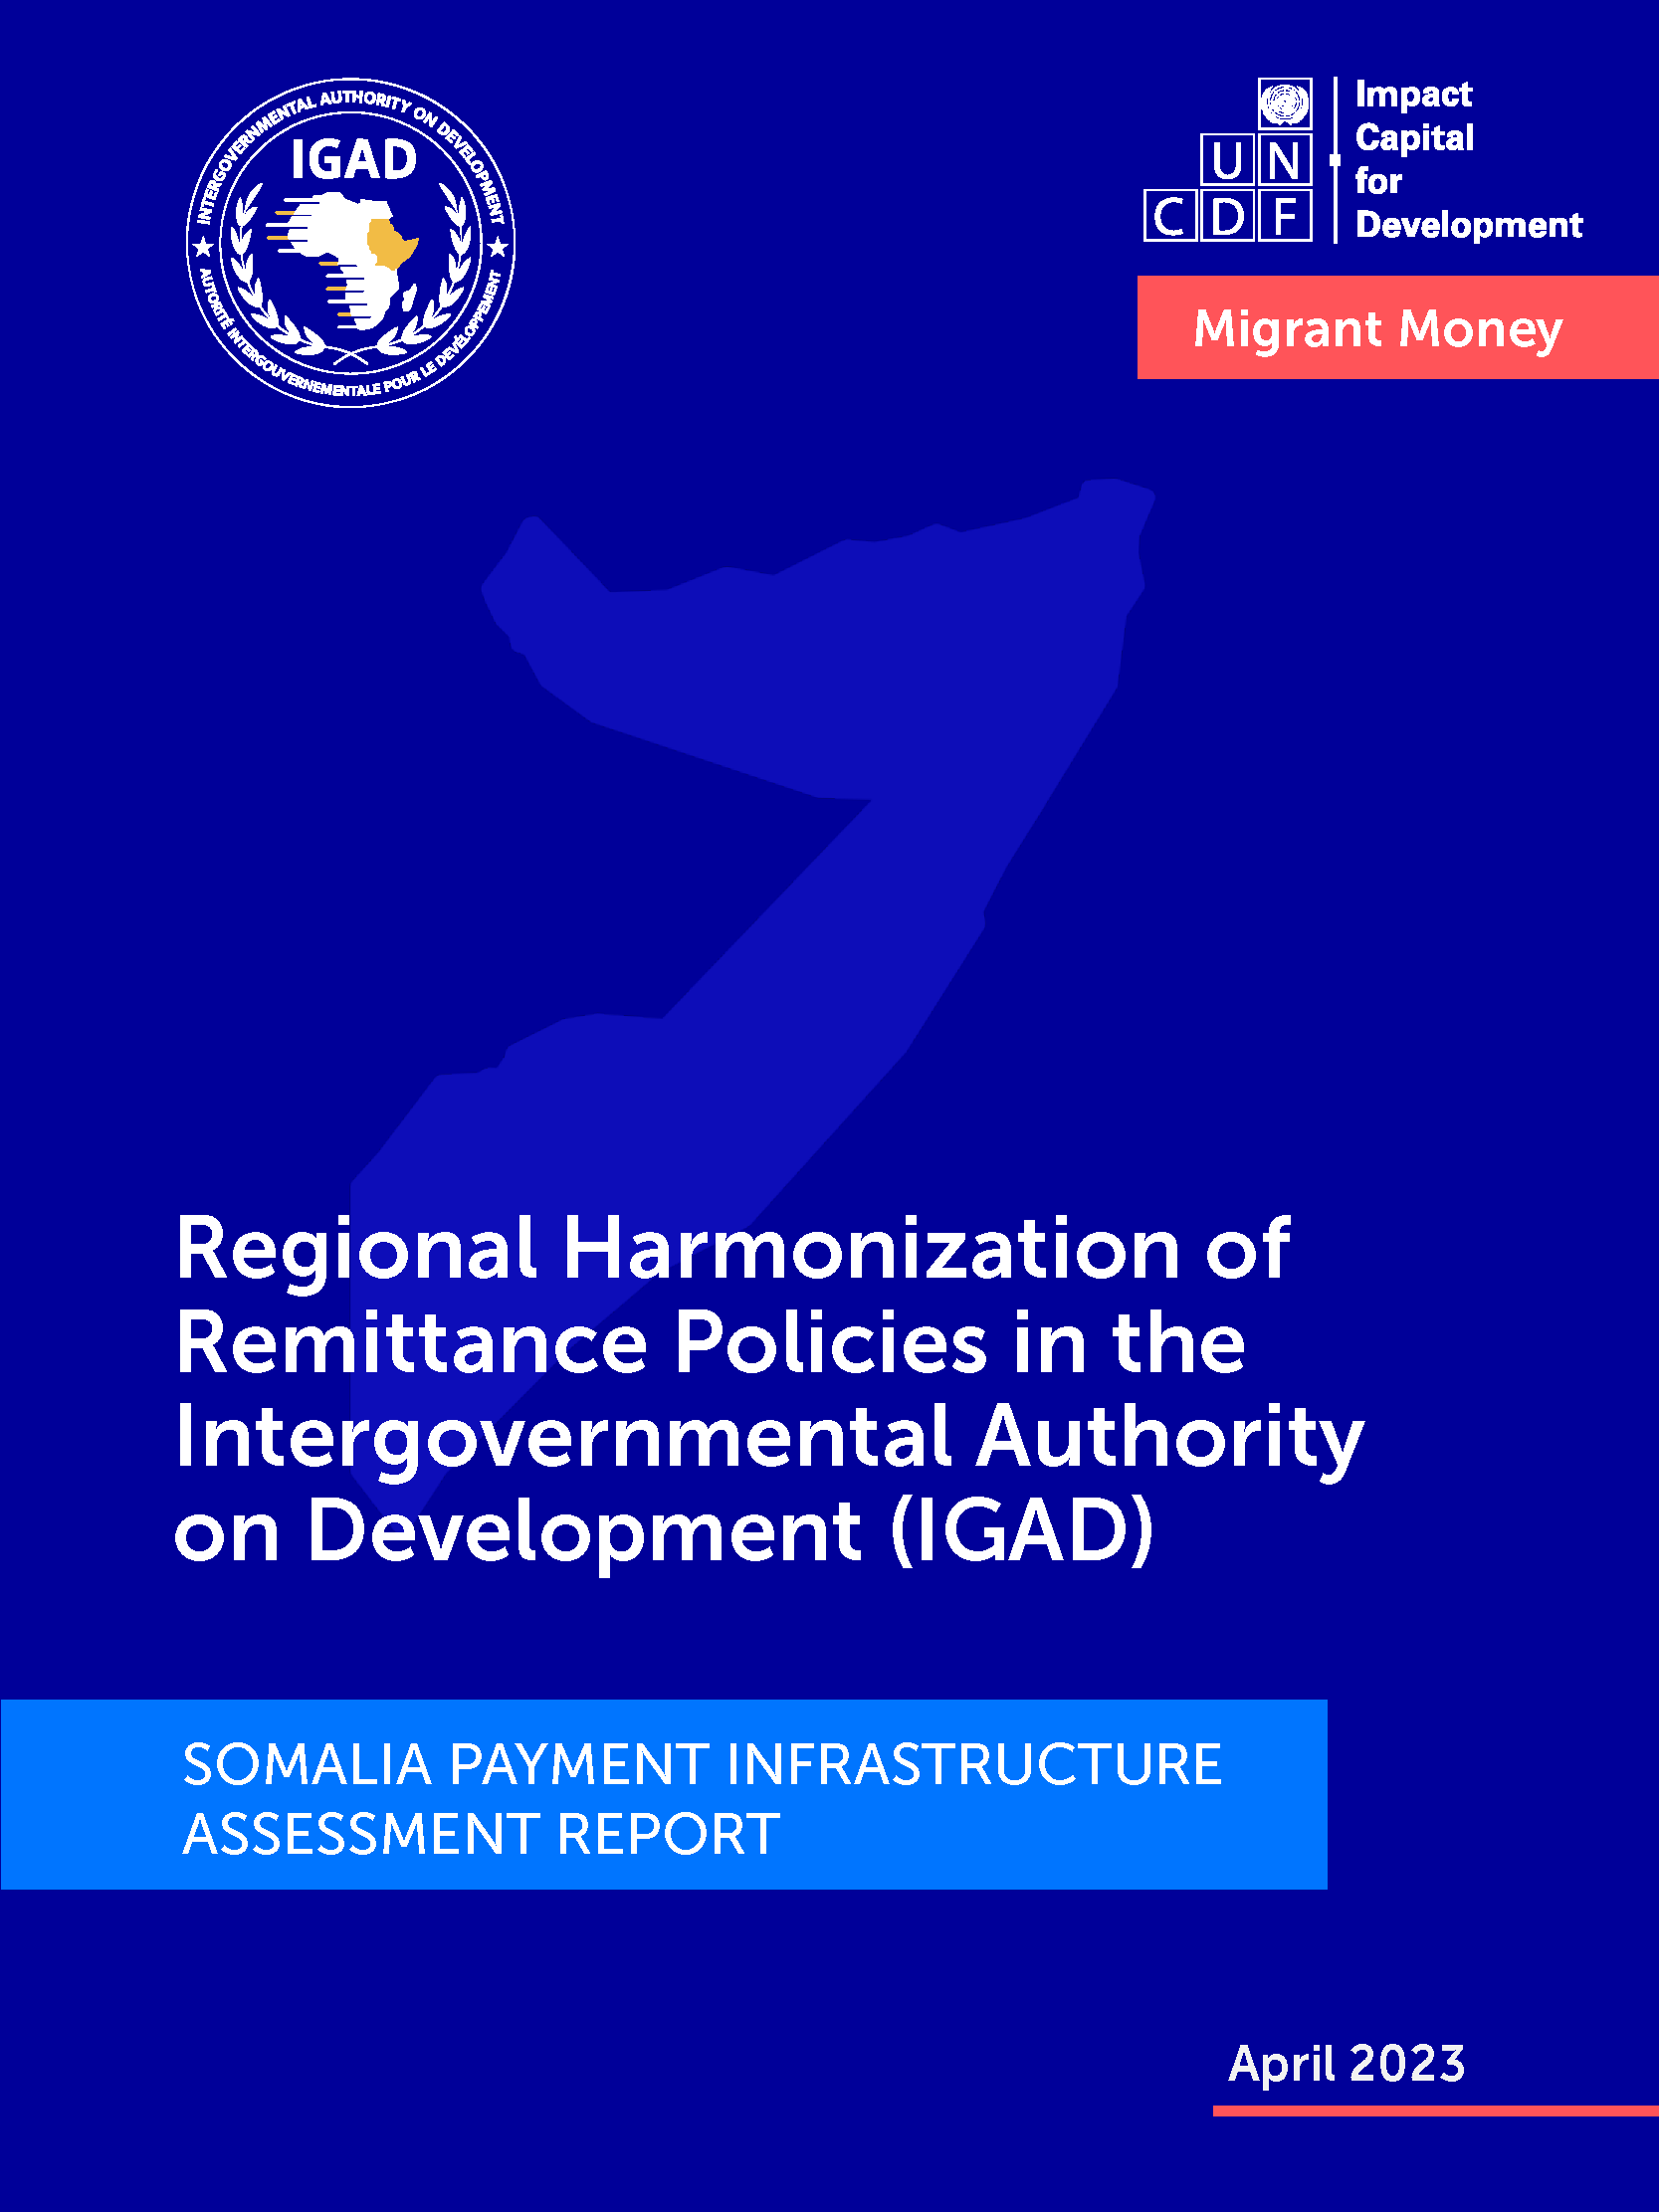 Somalia Payment Infrastructure Assessment Report: Regional Harmonization of Remittance Policies in IGAD